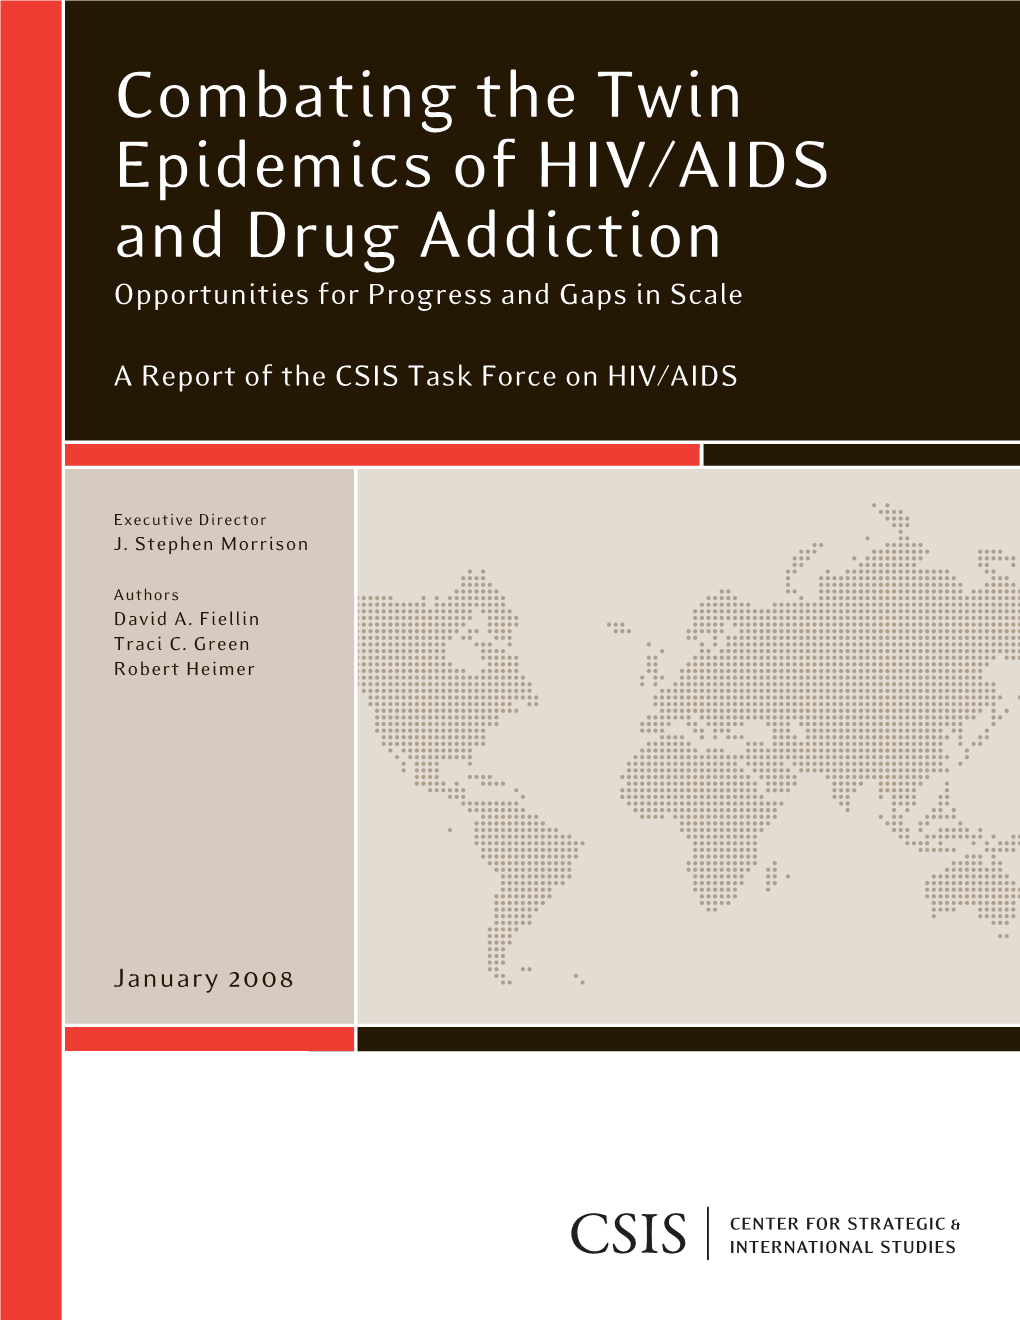 Combating the Twin Epidemics of Hiv/Aids and Drug Addiction Opportunities for Progress and Gaps in Scale